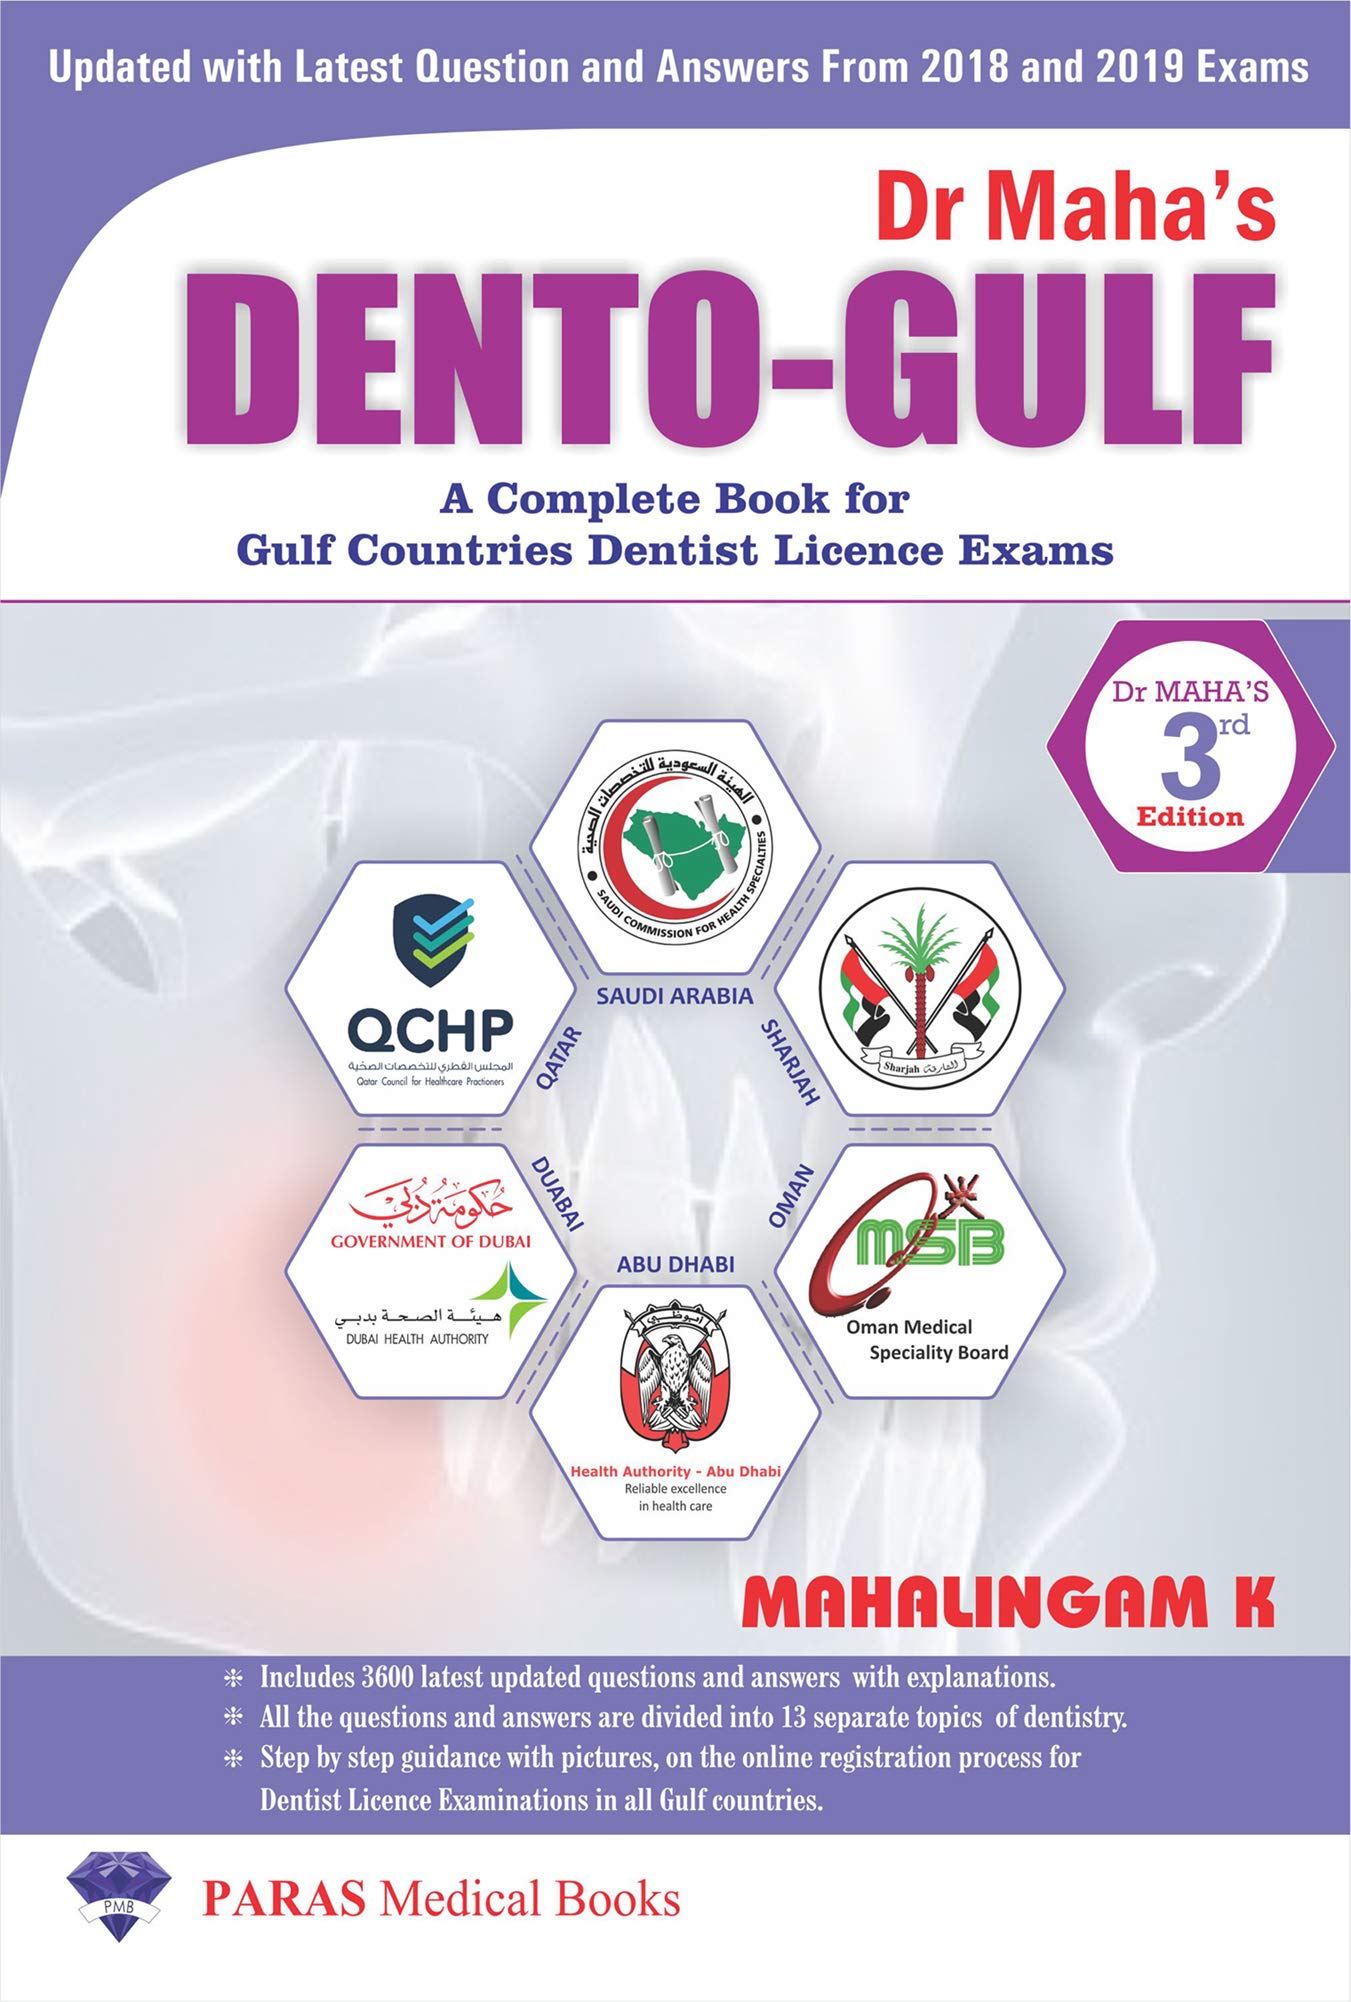 dr-mahas-dento-gulfa-complete-book-for-gulf-countries-dentist-licence-exams3rd-edition